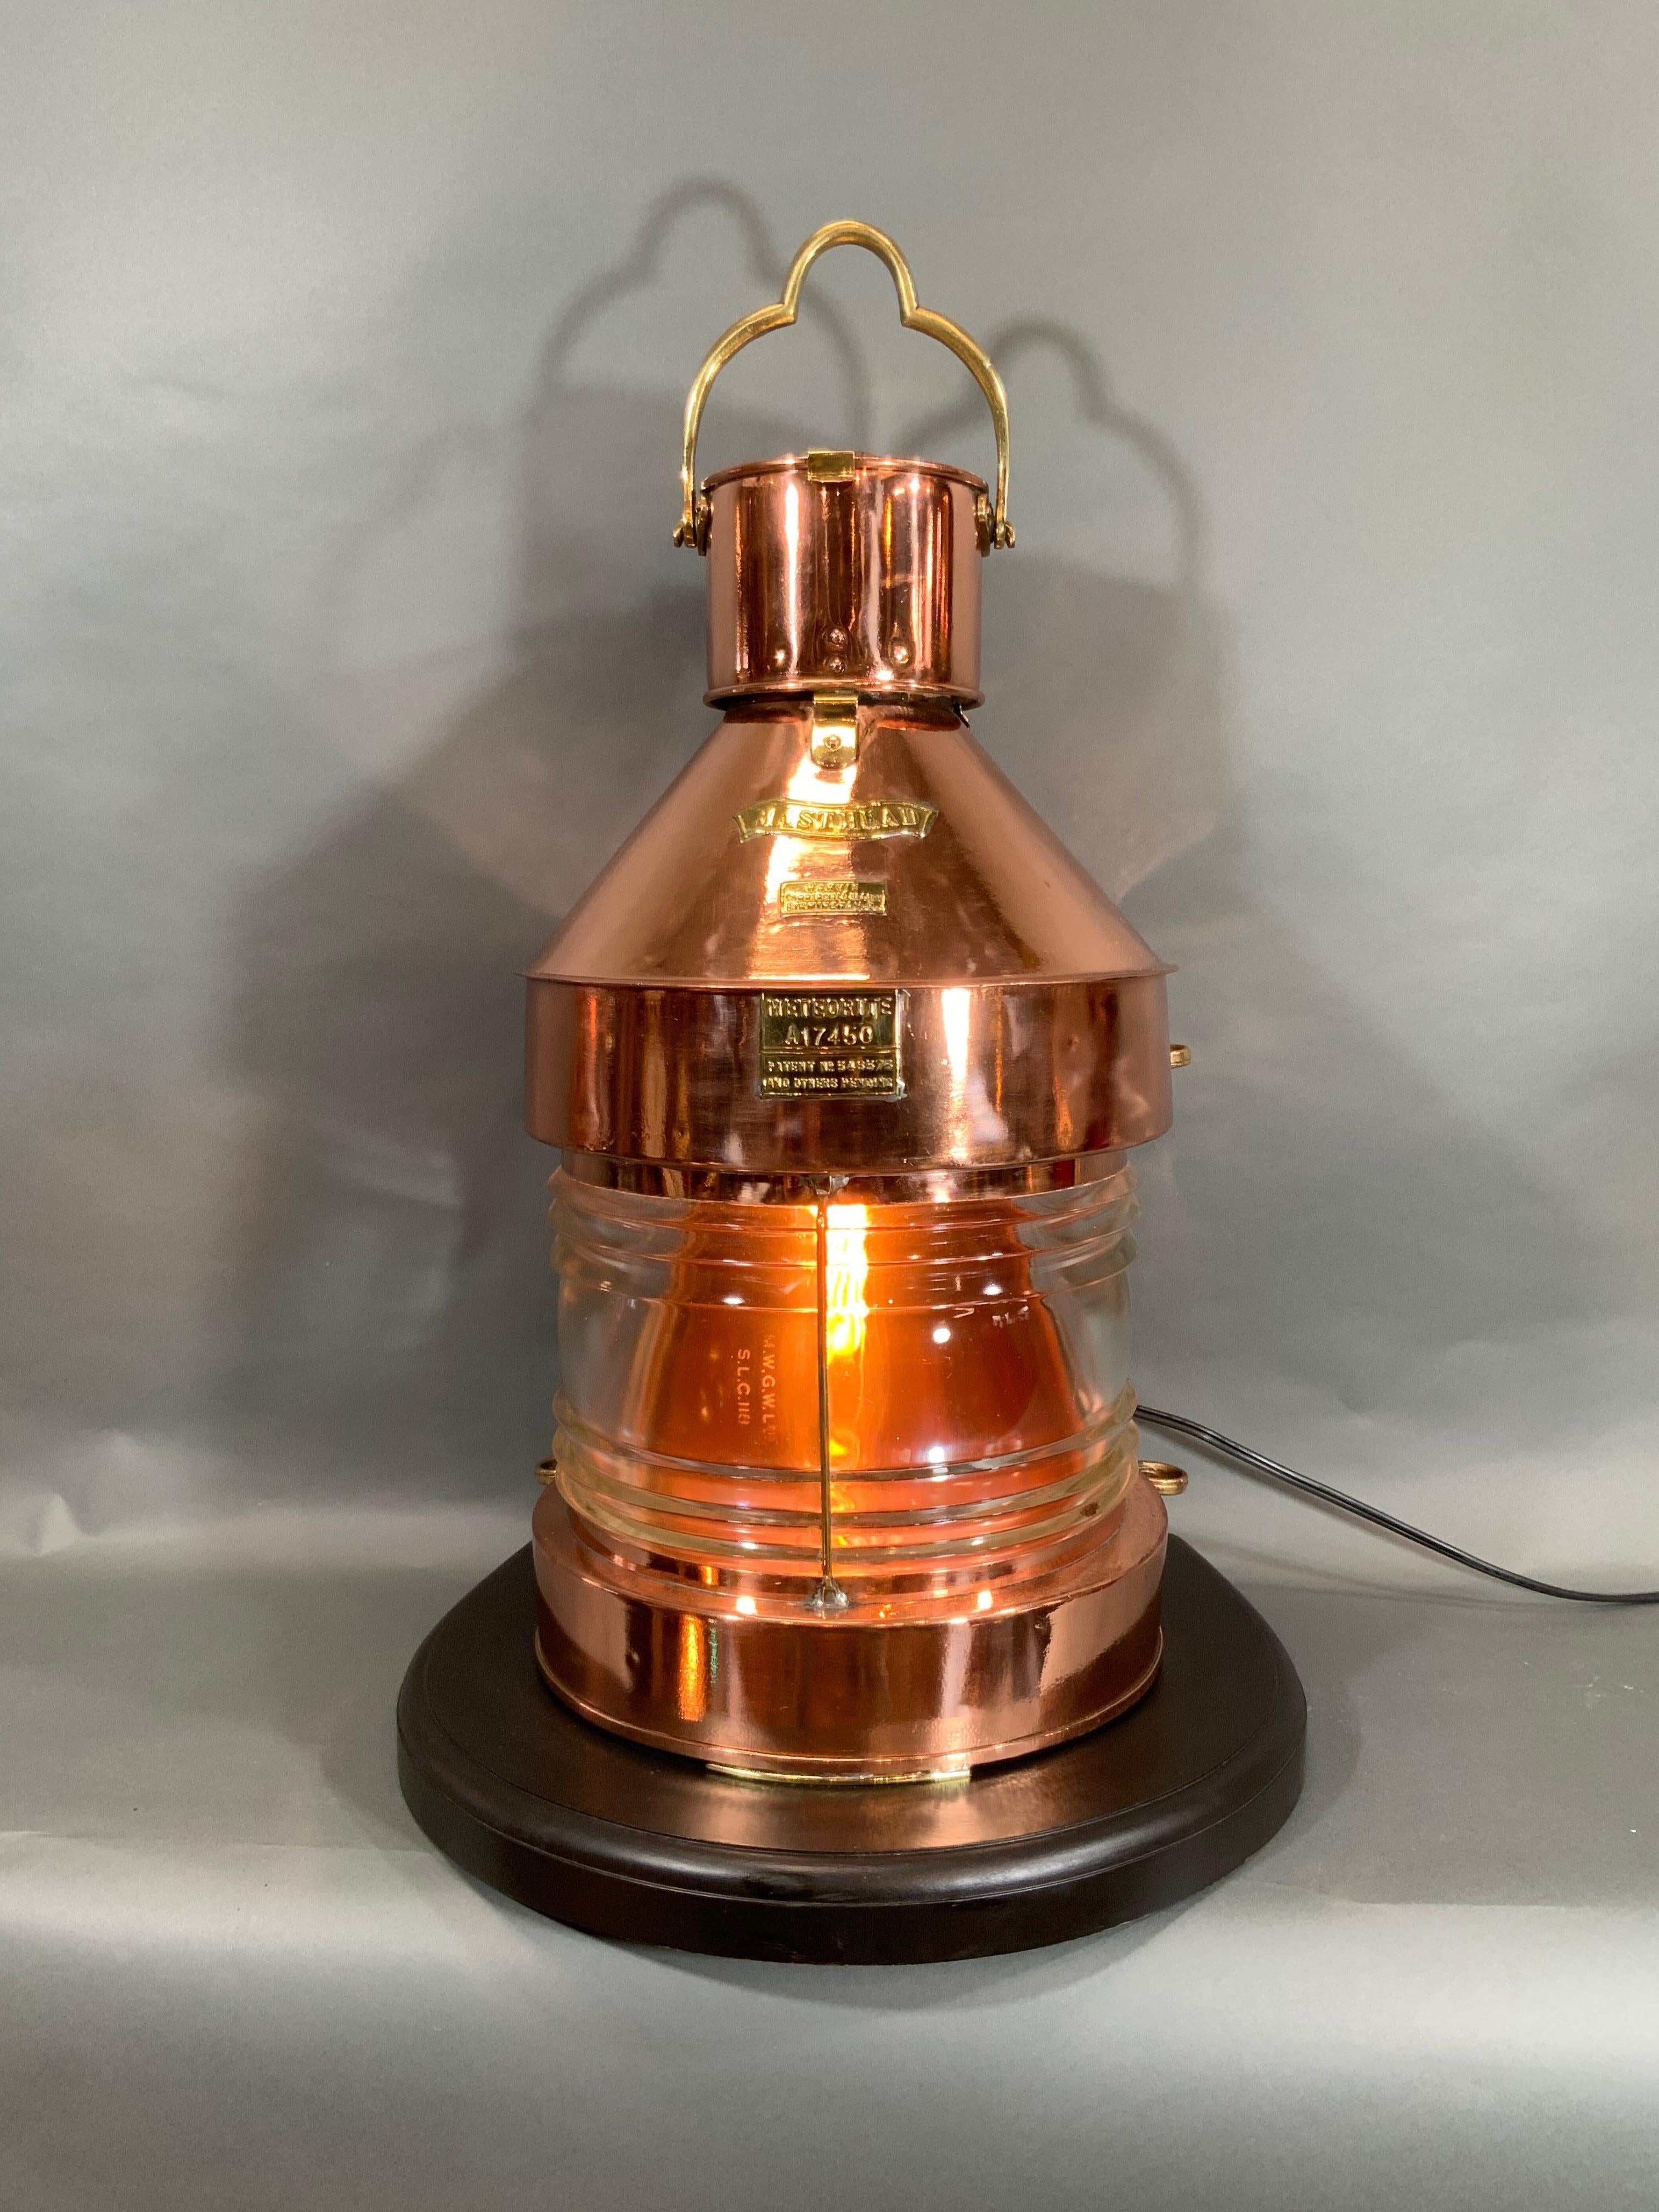 Ship's lantern by the English maker Meteorite. This is a Masthead lantern of a very large and sturdy size. It is fitted with a glass Fresnel lens, brass bezel, brass name badges including ship's chandler Harvey of Birmingham and serial number